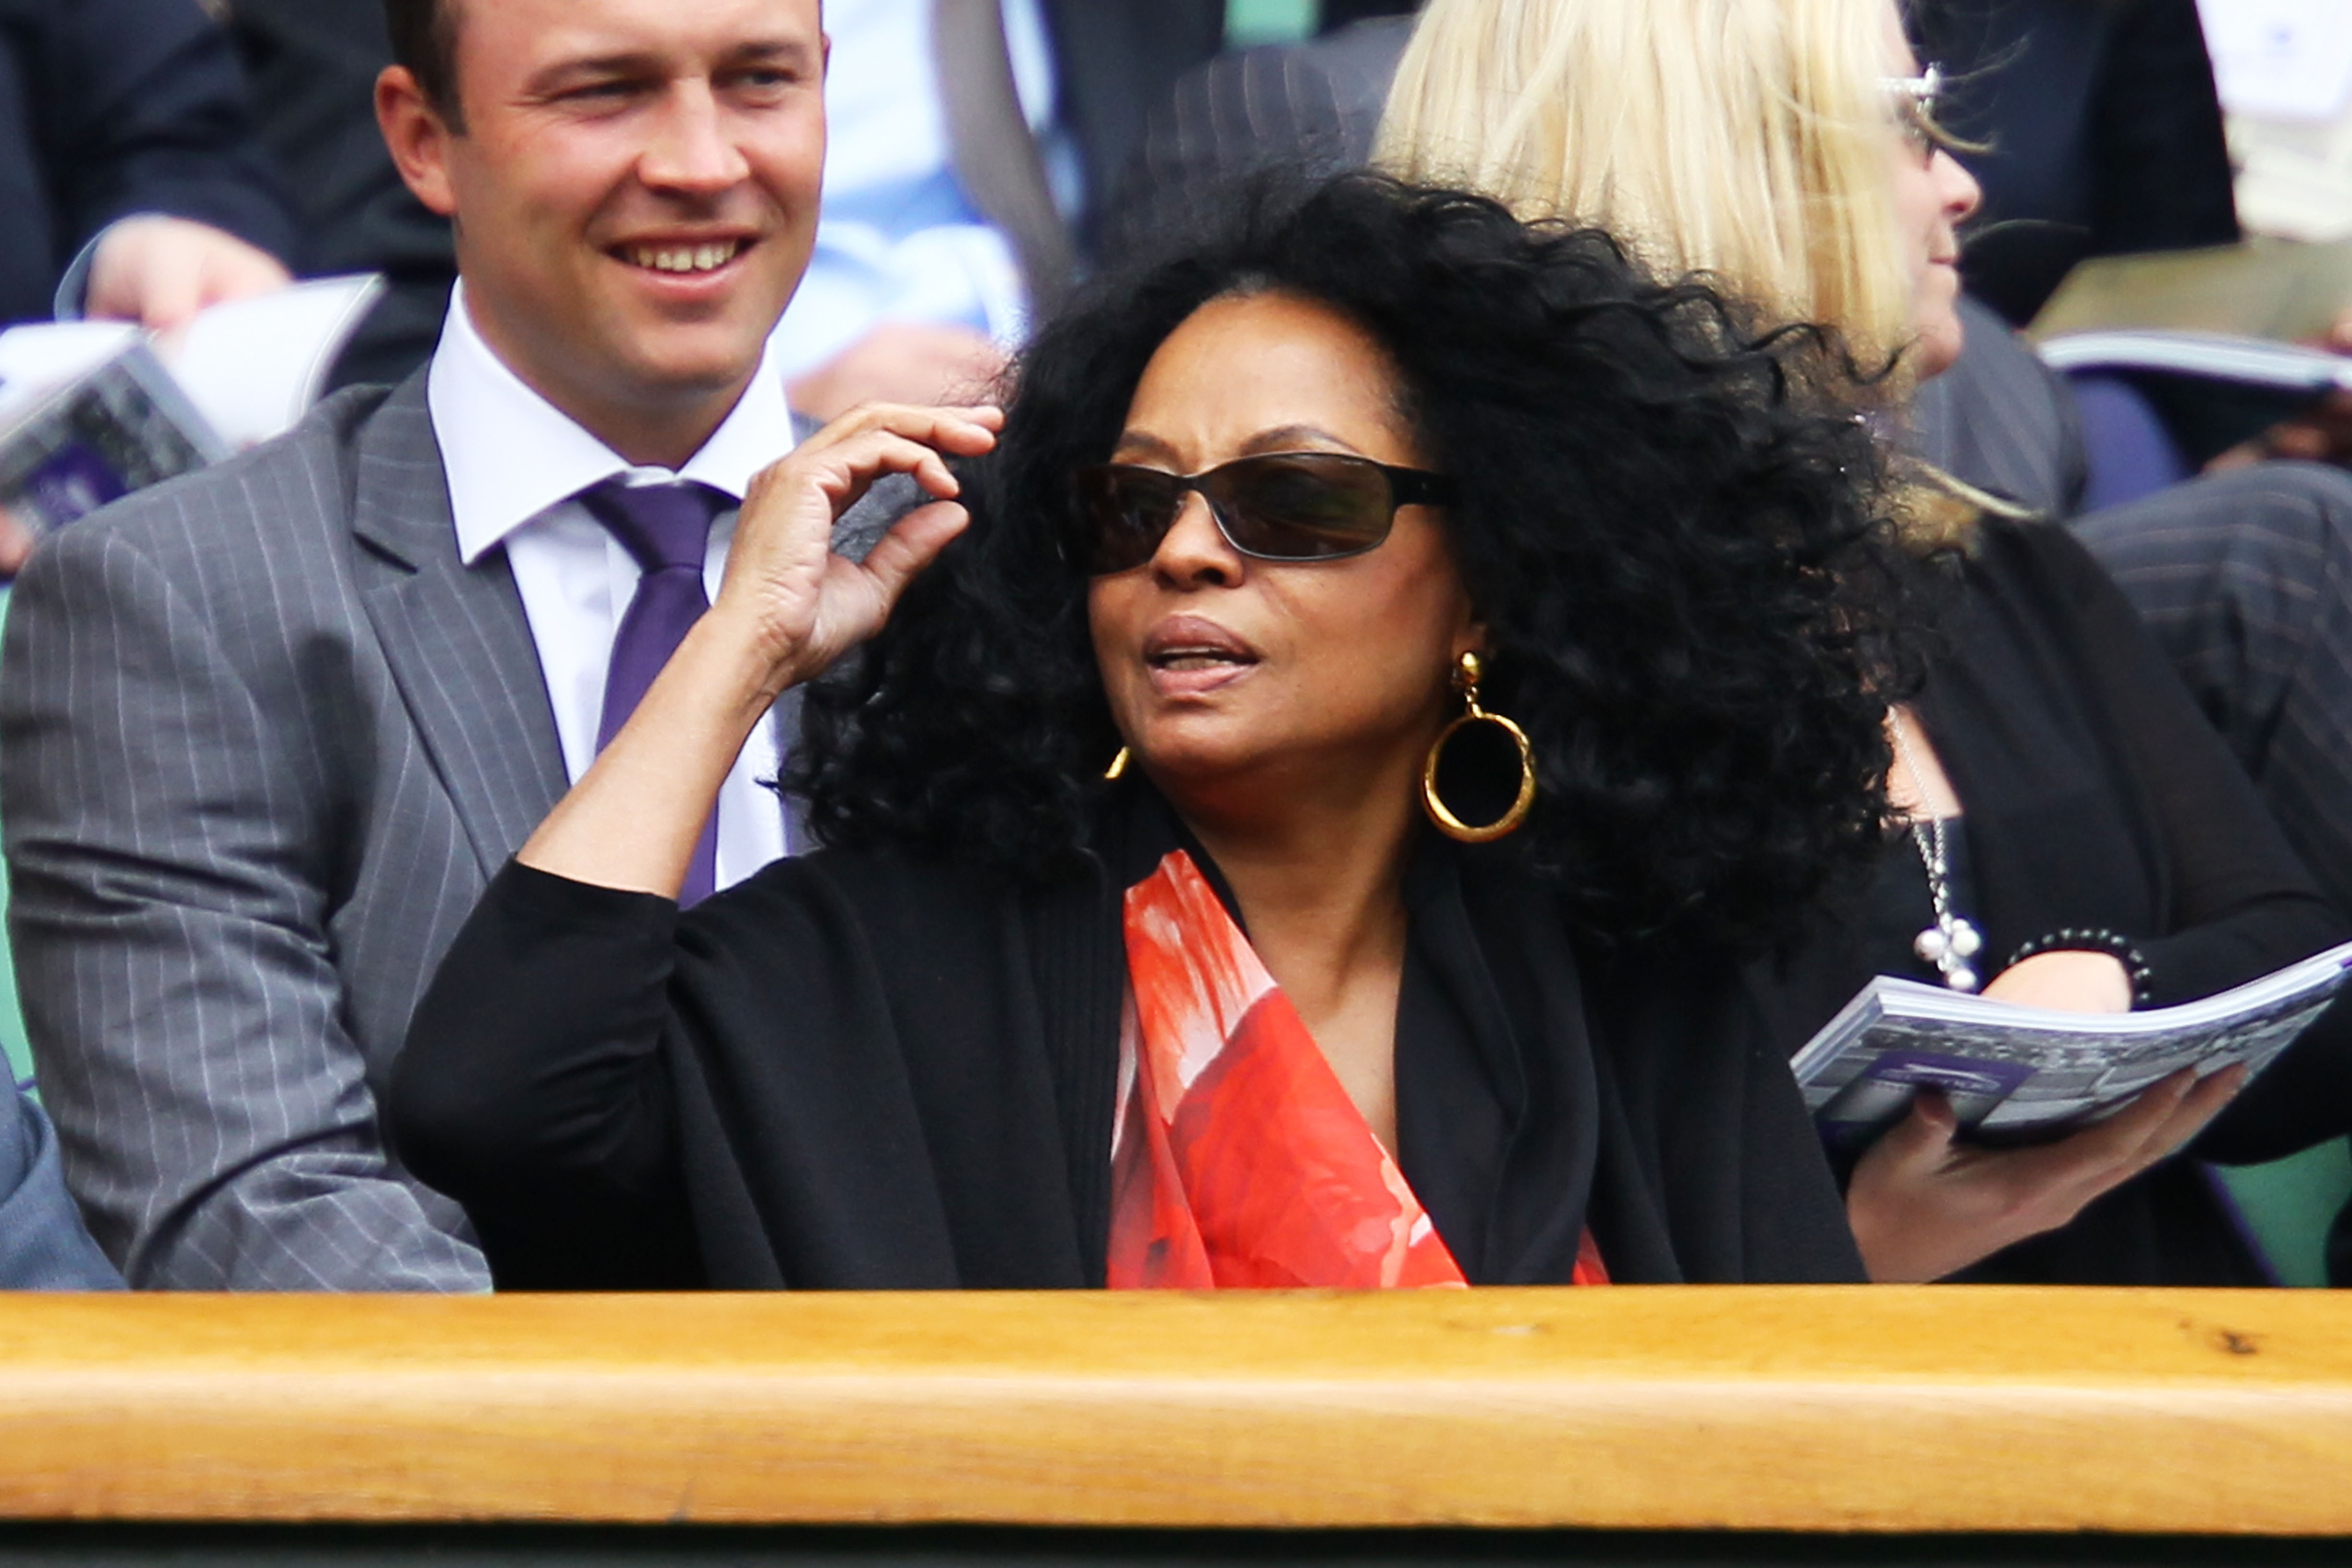 Diana Ross wearing sunglasses and a scarf at Wimbledon.